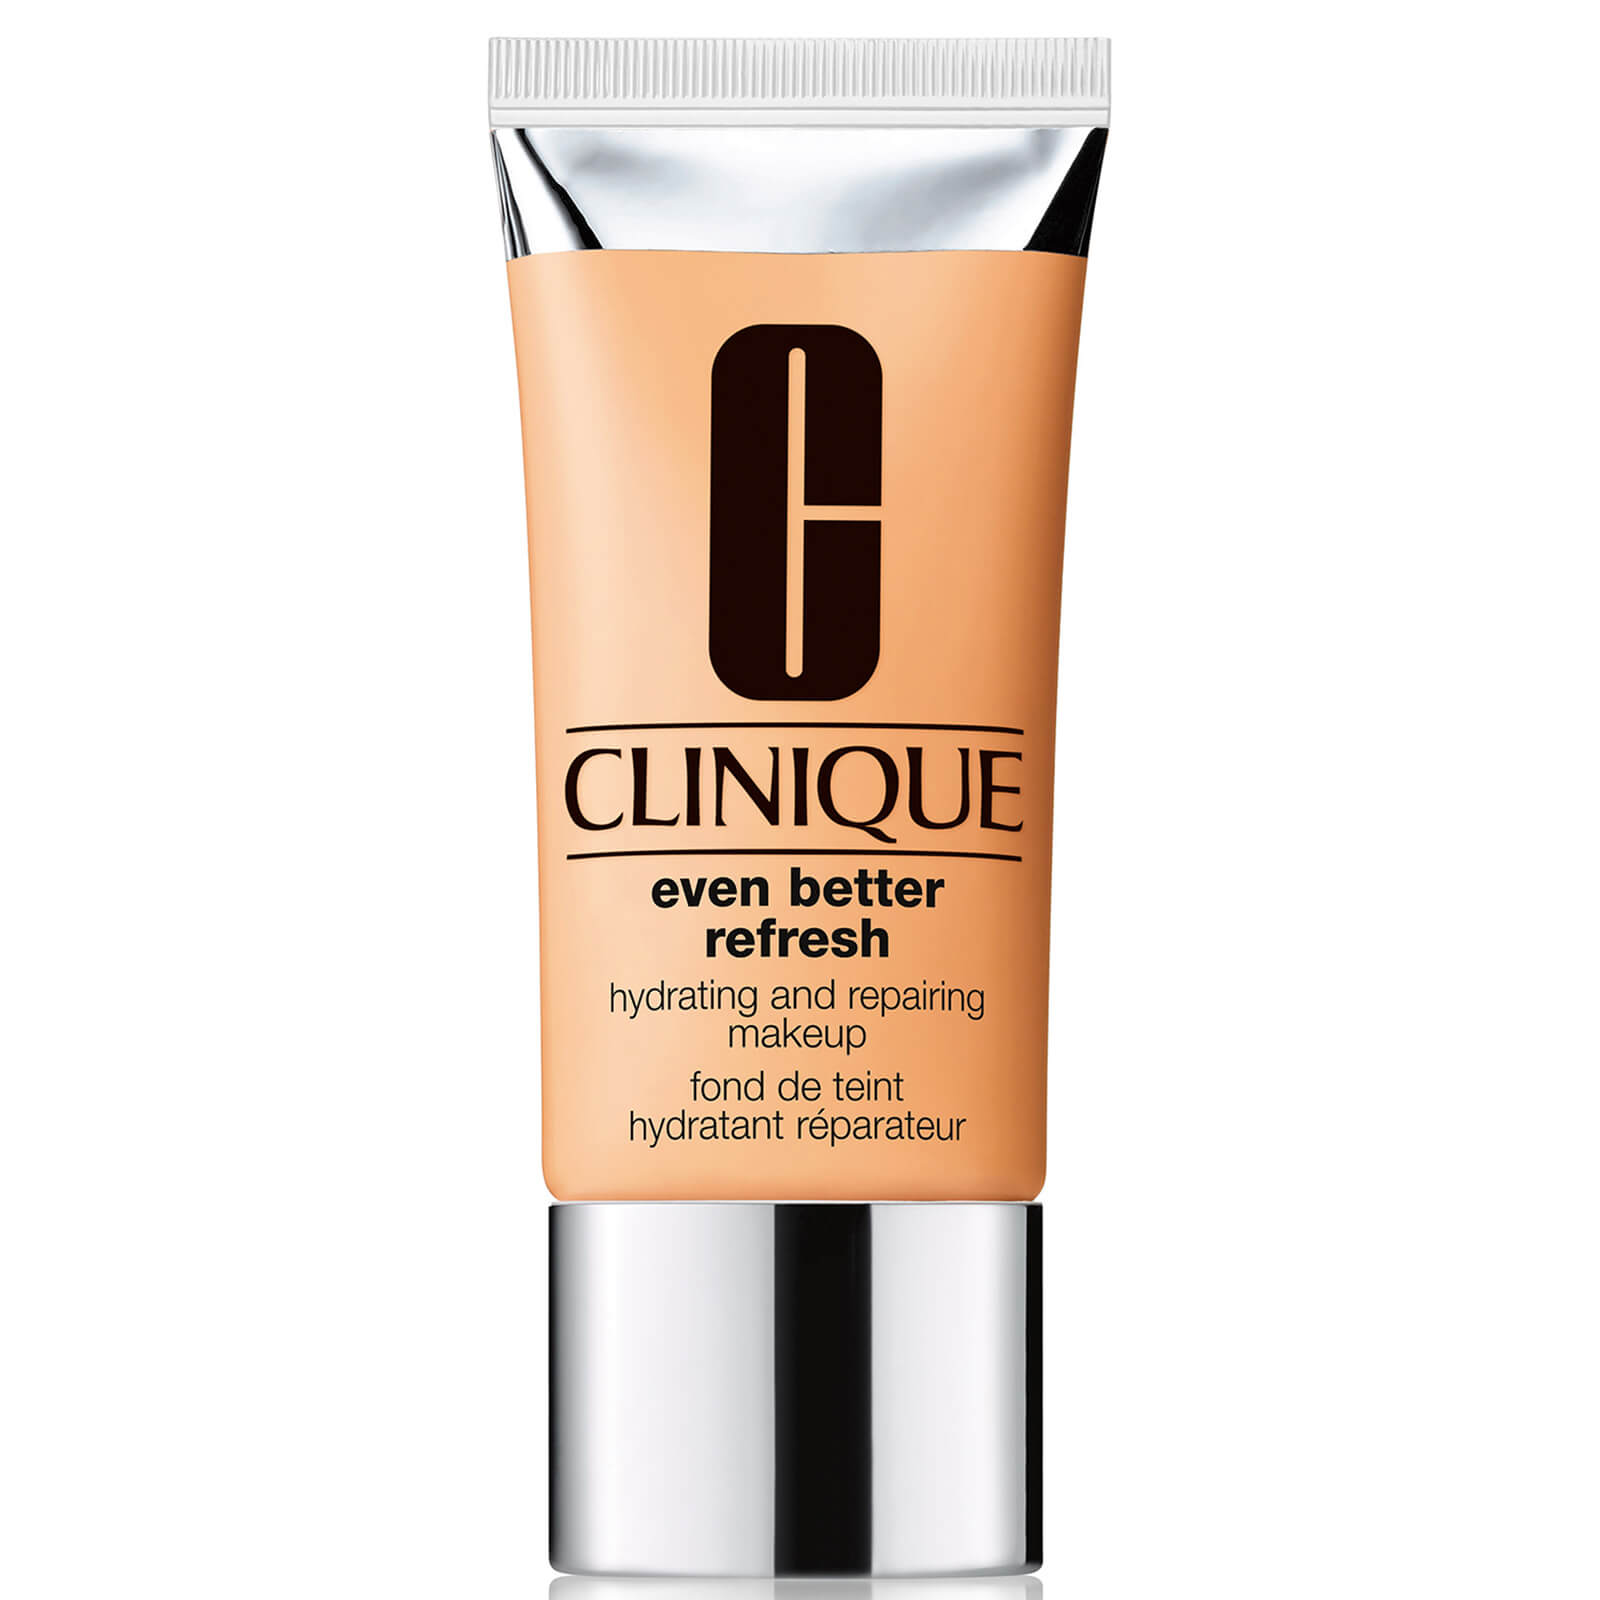 Clinique Even Better Refresh Hydrating and Repairing Makeup 30ml (Various Shades) - WN 68 Brulee